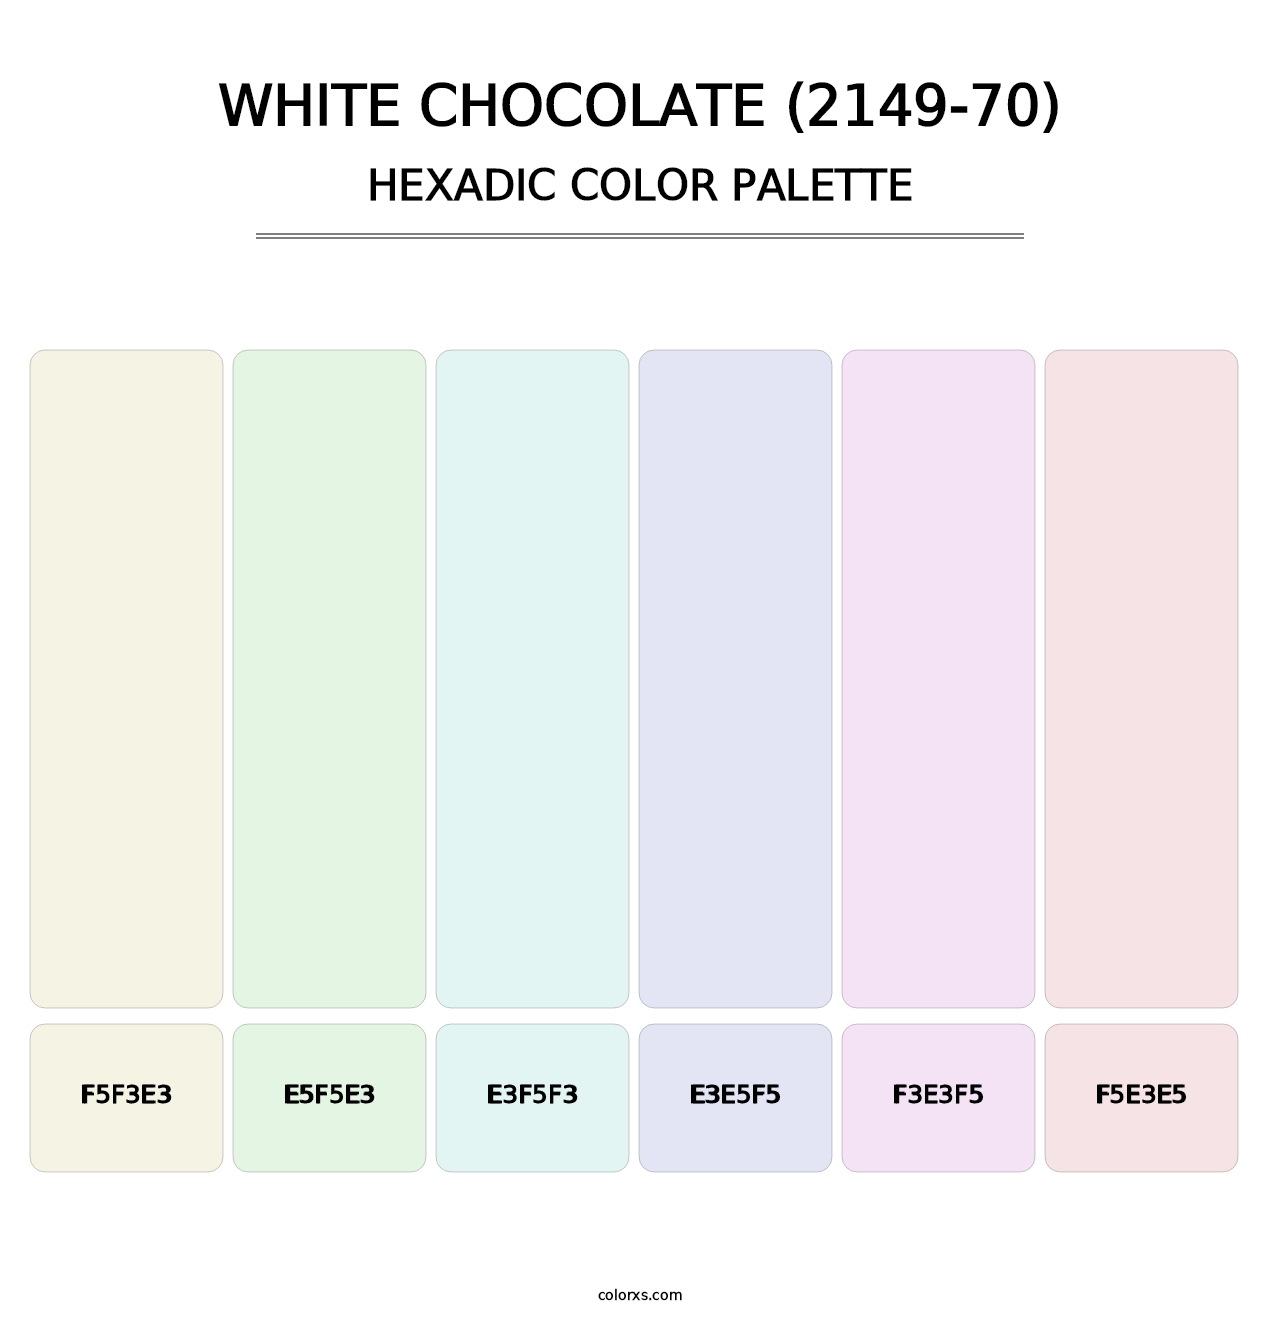 White Chocolate (2149-70) - Hexadic Color Palette